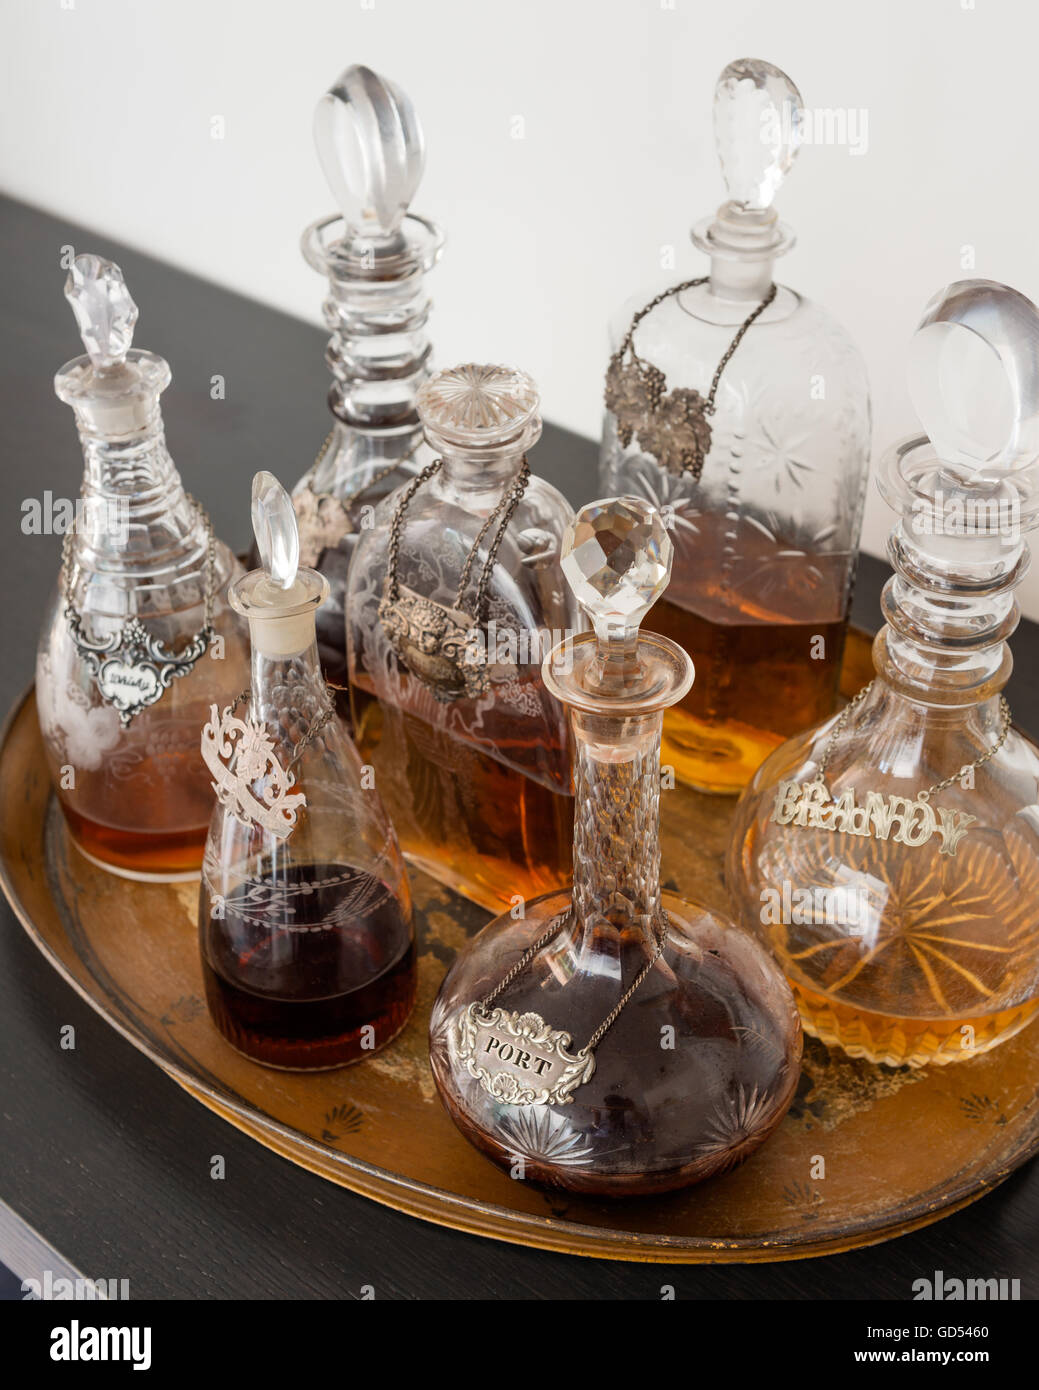 Antique decanters on drinks tray Stock Photo